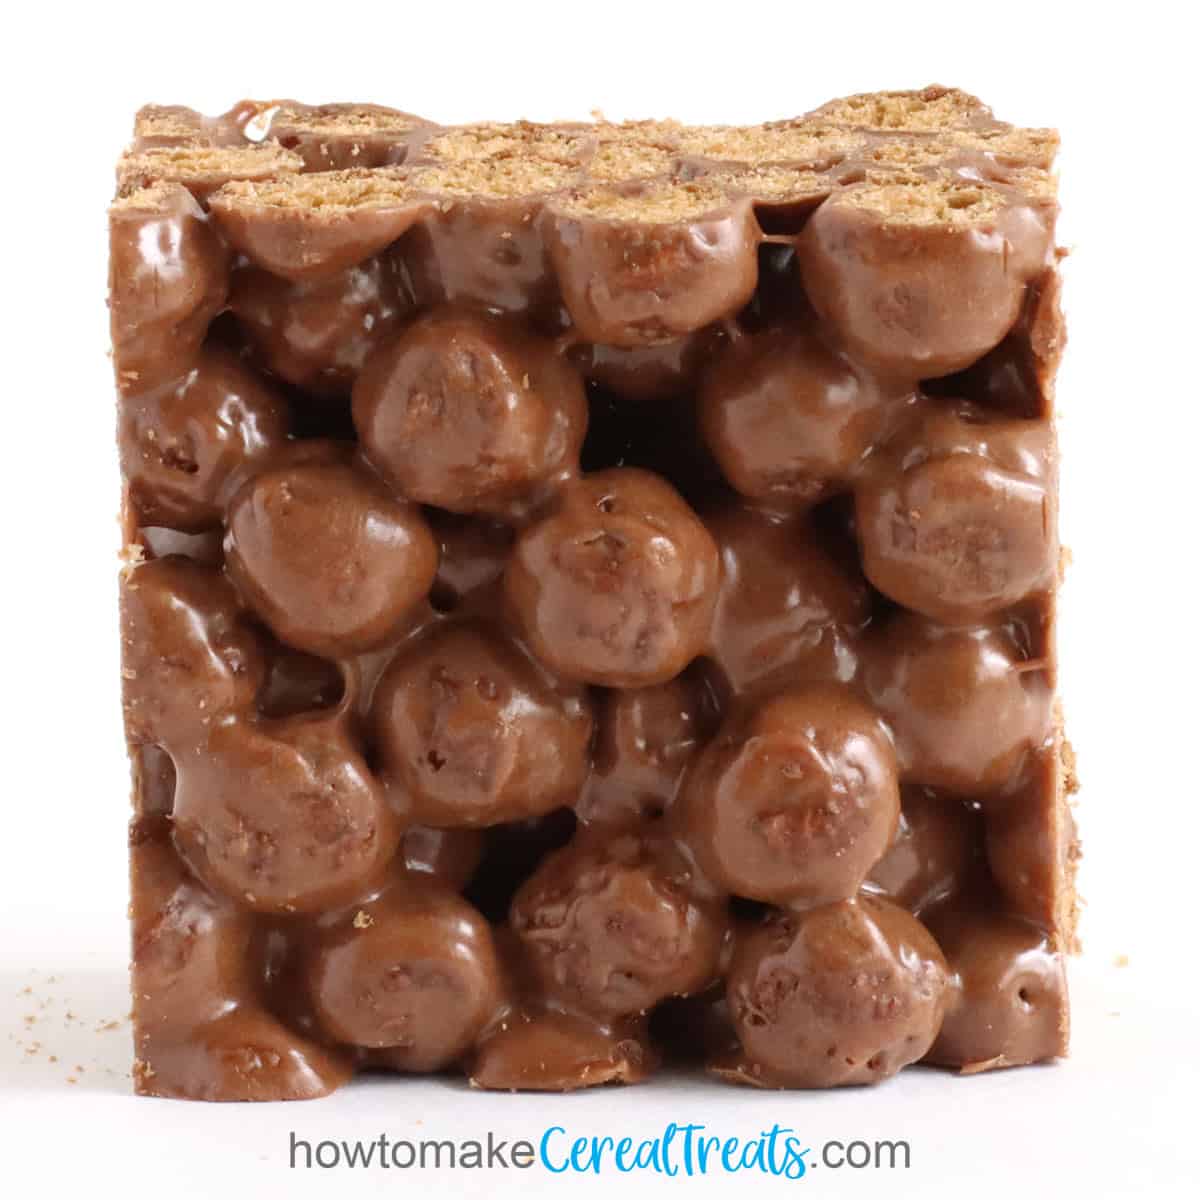 Marshmallow and Chocolate Cocoa Puffs Cereal Treats